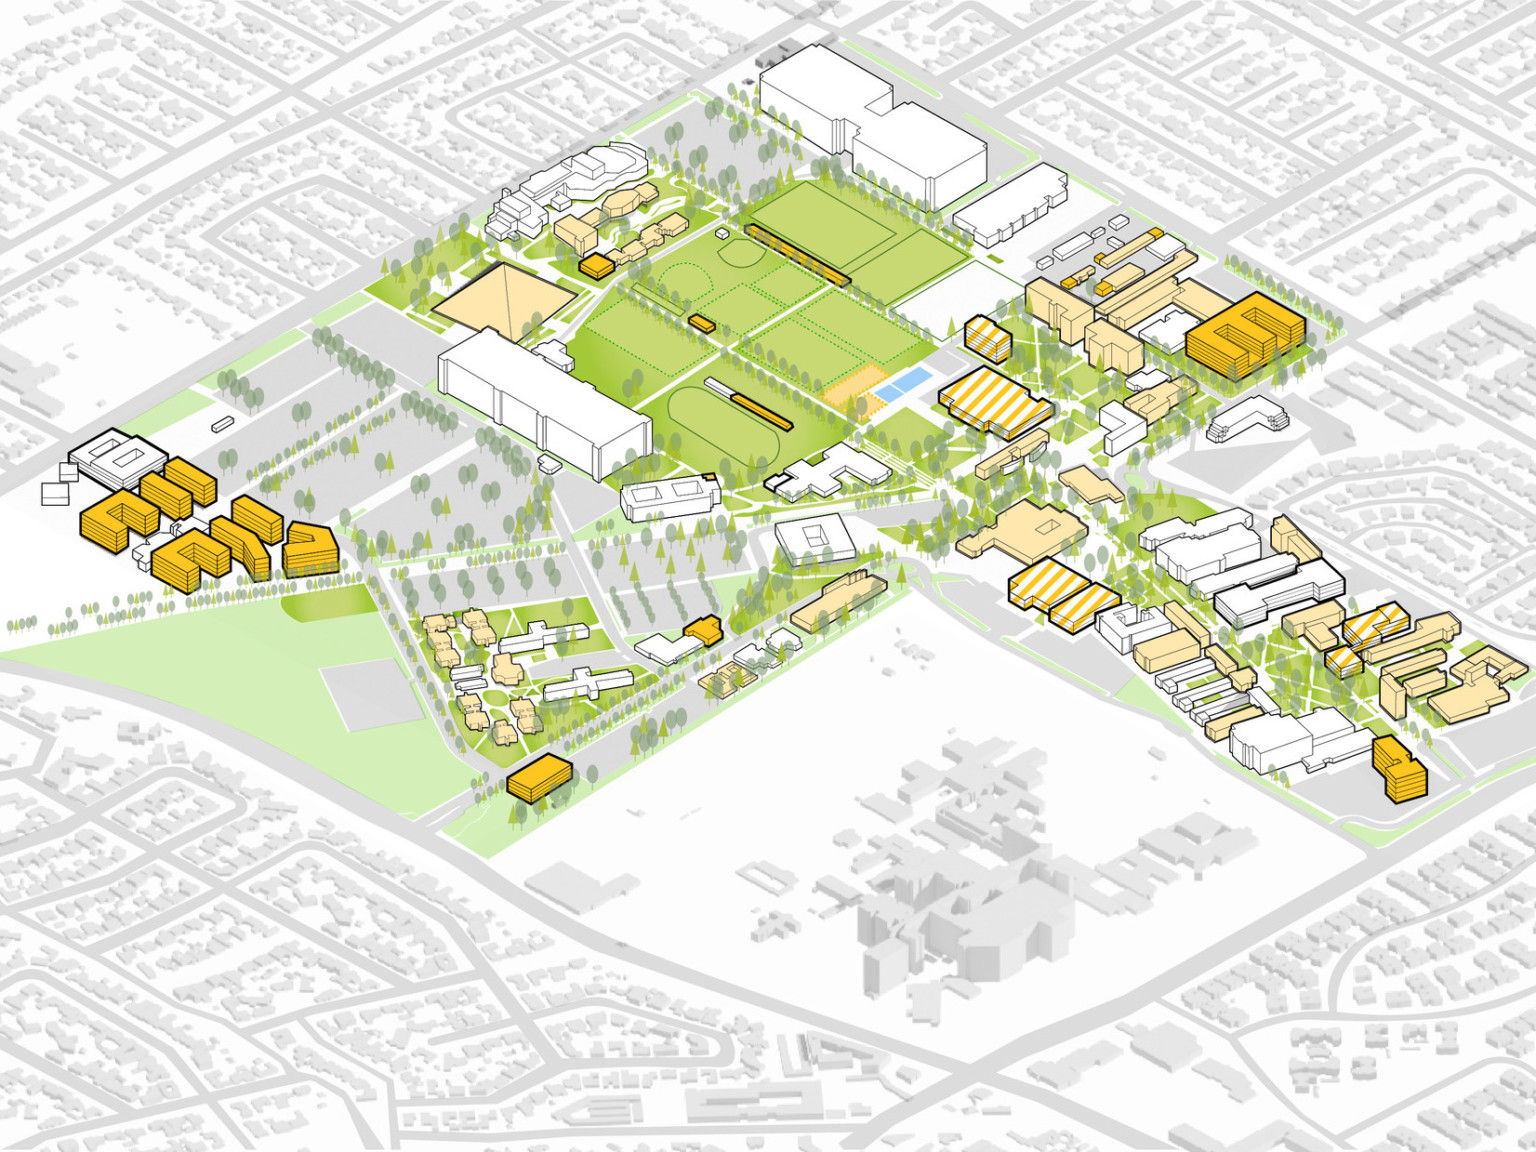 aerial view of illustrated map with yellow building forms and green lawns. neighborhoods are identified with gray outlines.